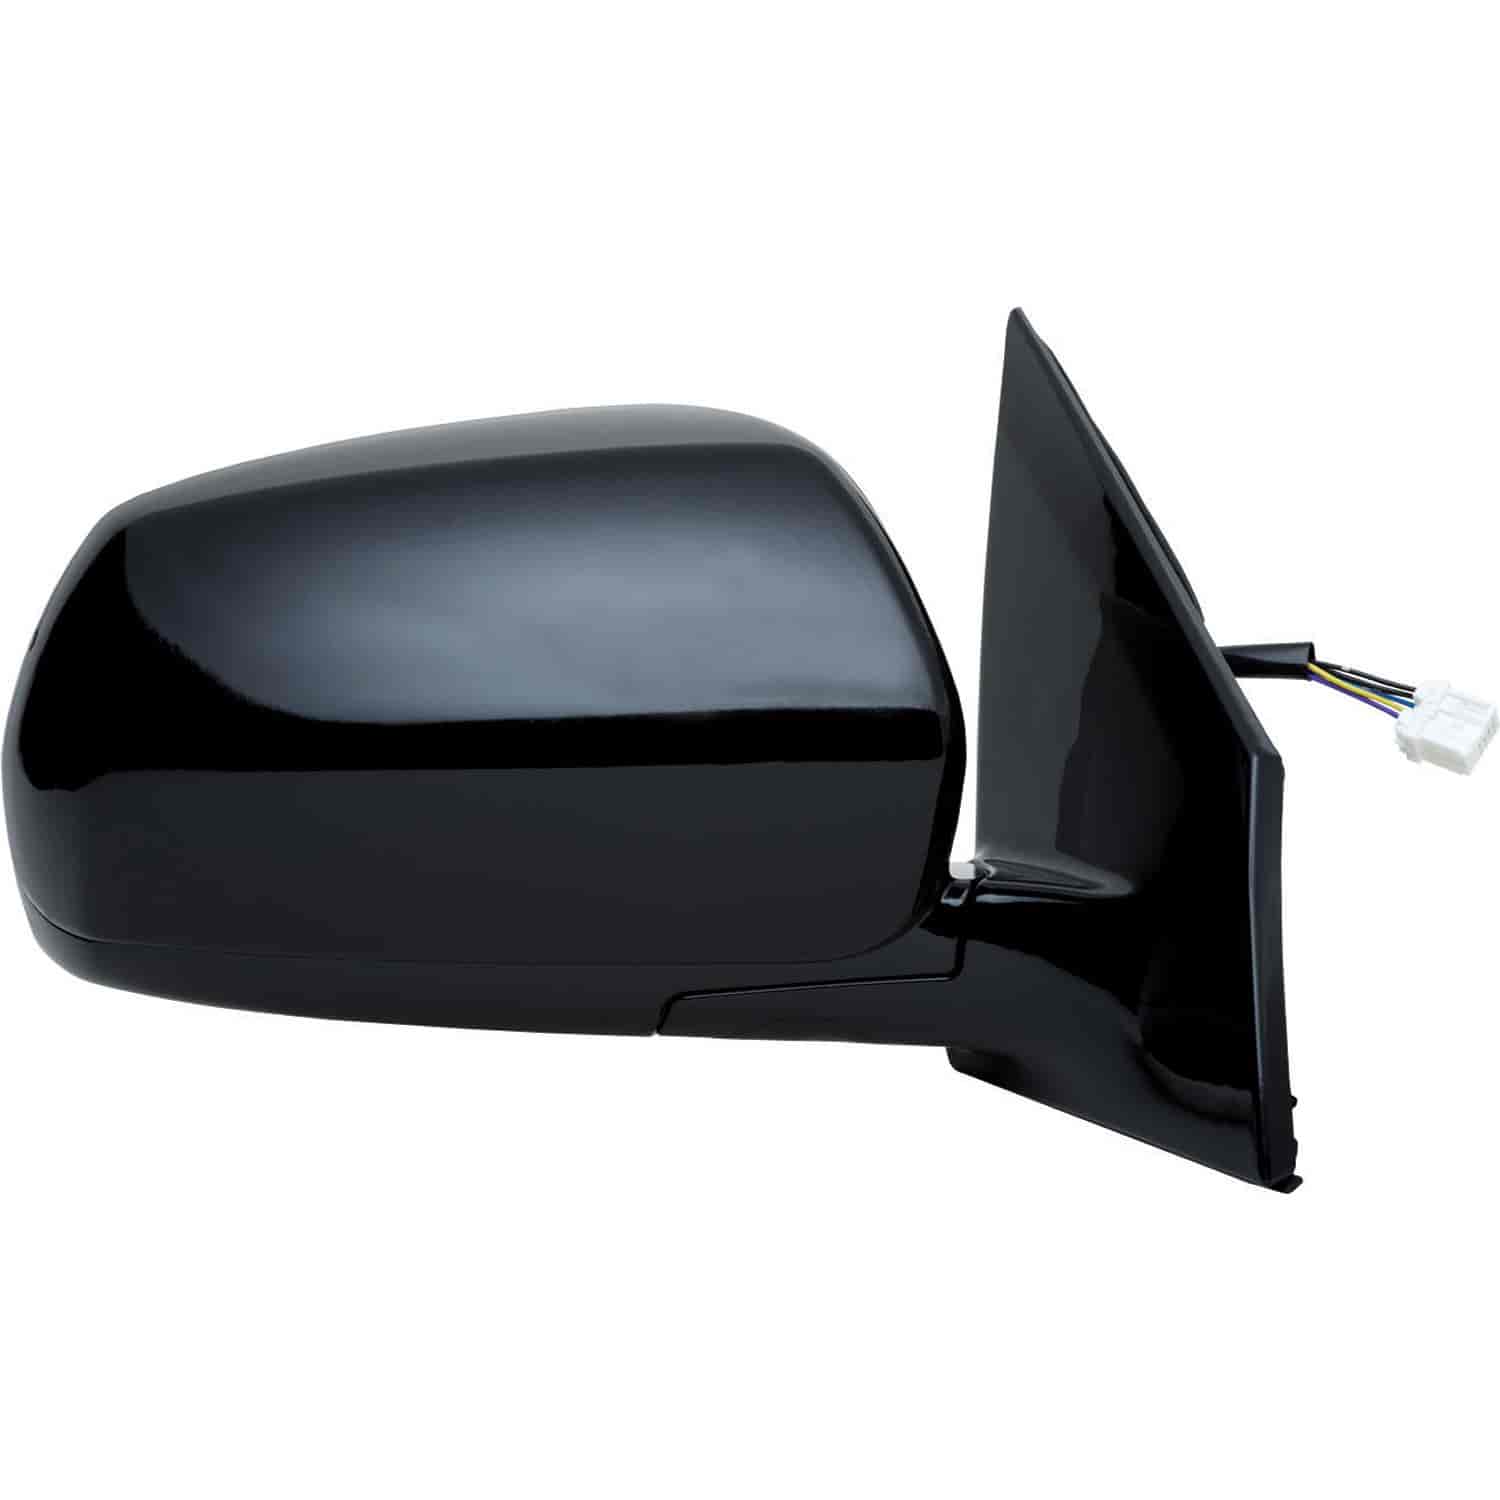 OEM Style Replacement mirror for 03-04 Nissan Murano w/memory passenger side mirror tested to fit an